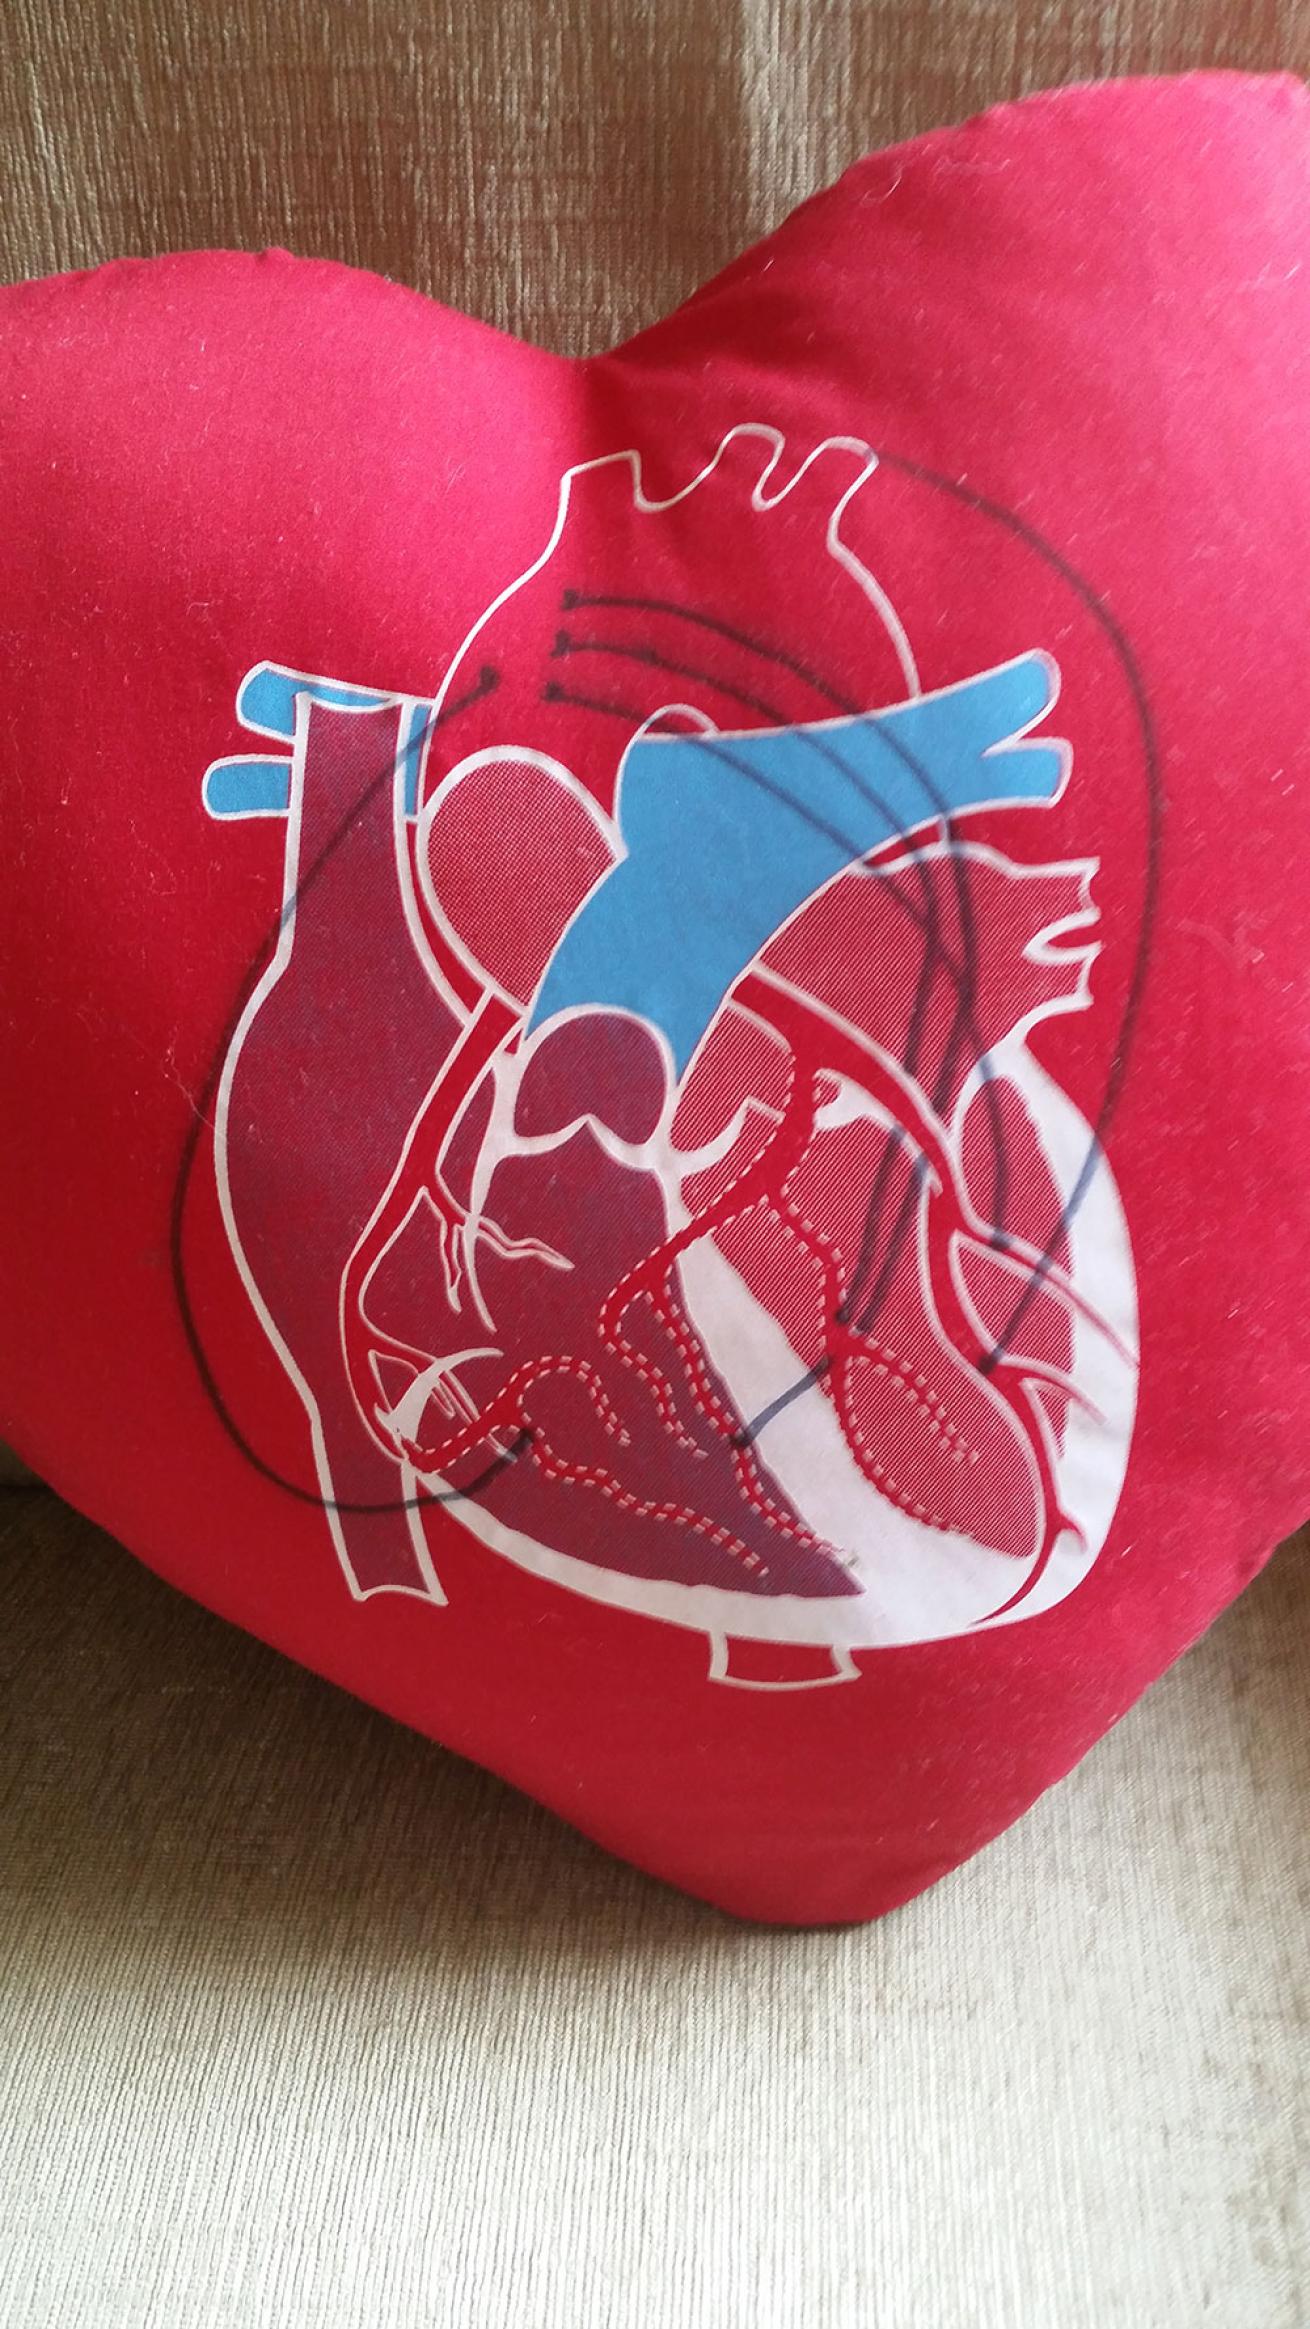 Heart pillow and diagram after heart surgery